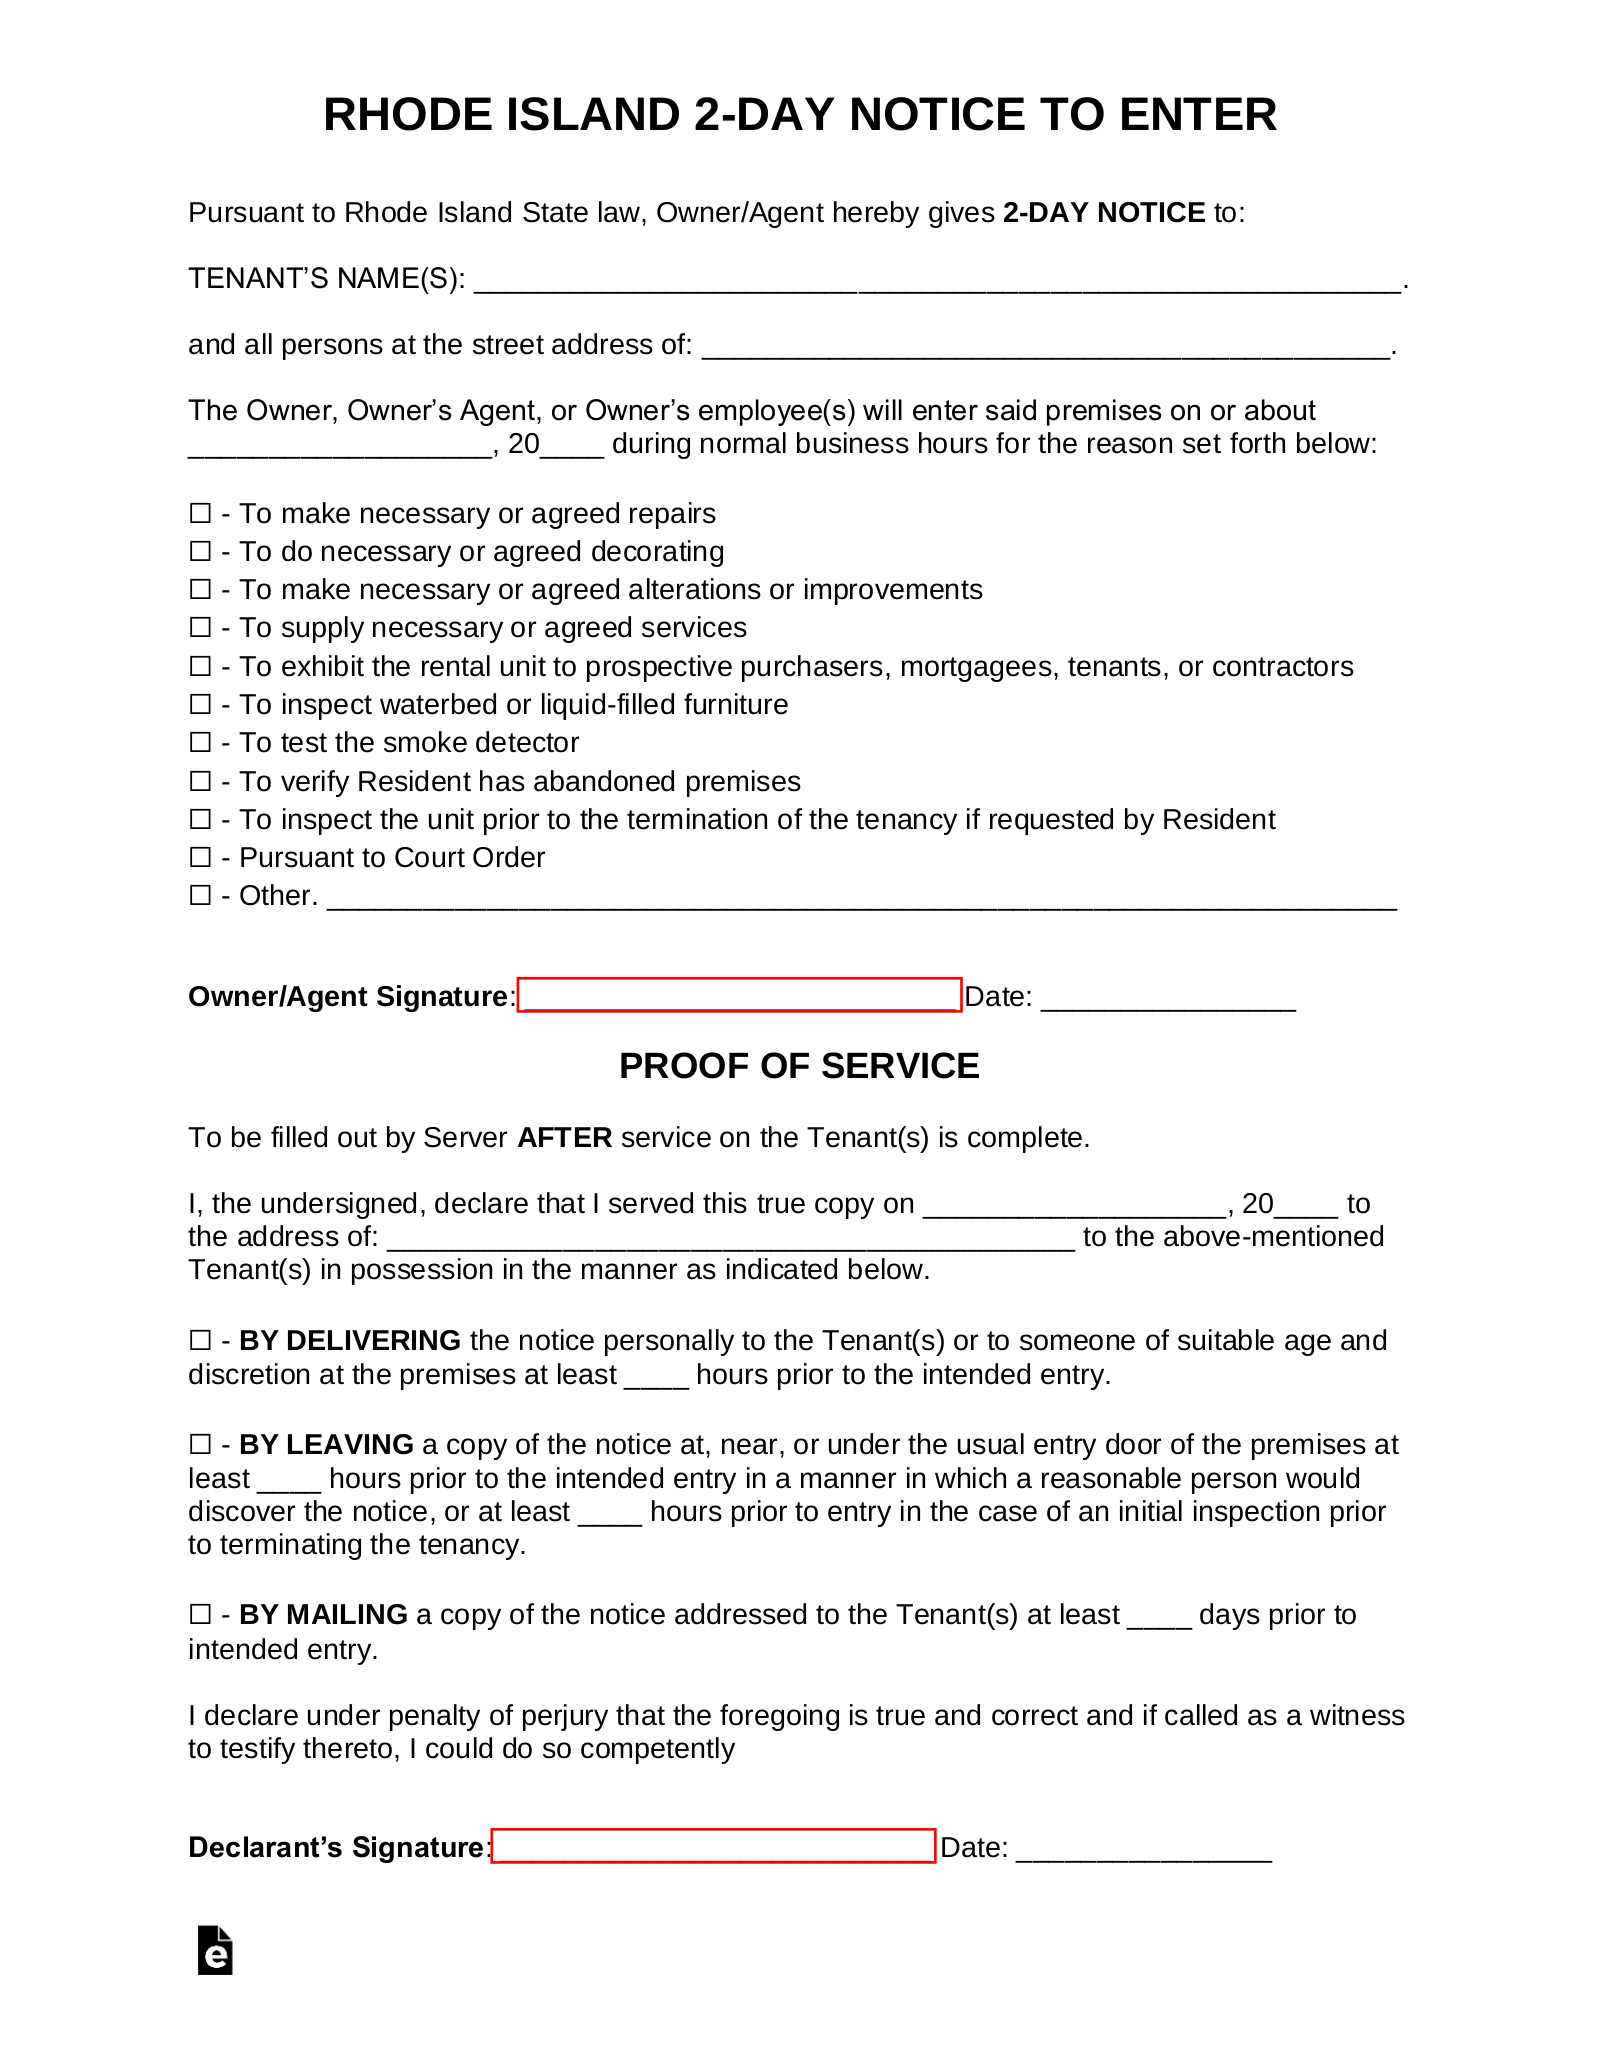 Rhode Island 2-Day Landlord Notice to Enter Form